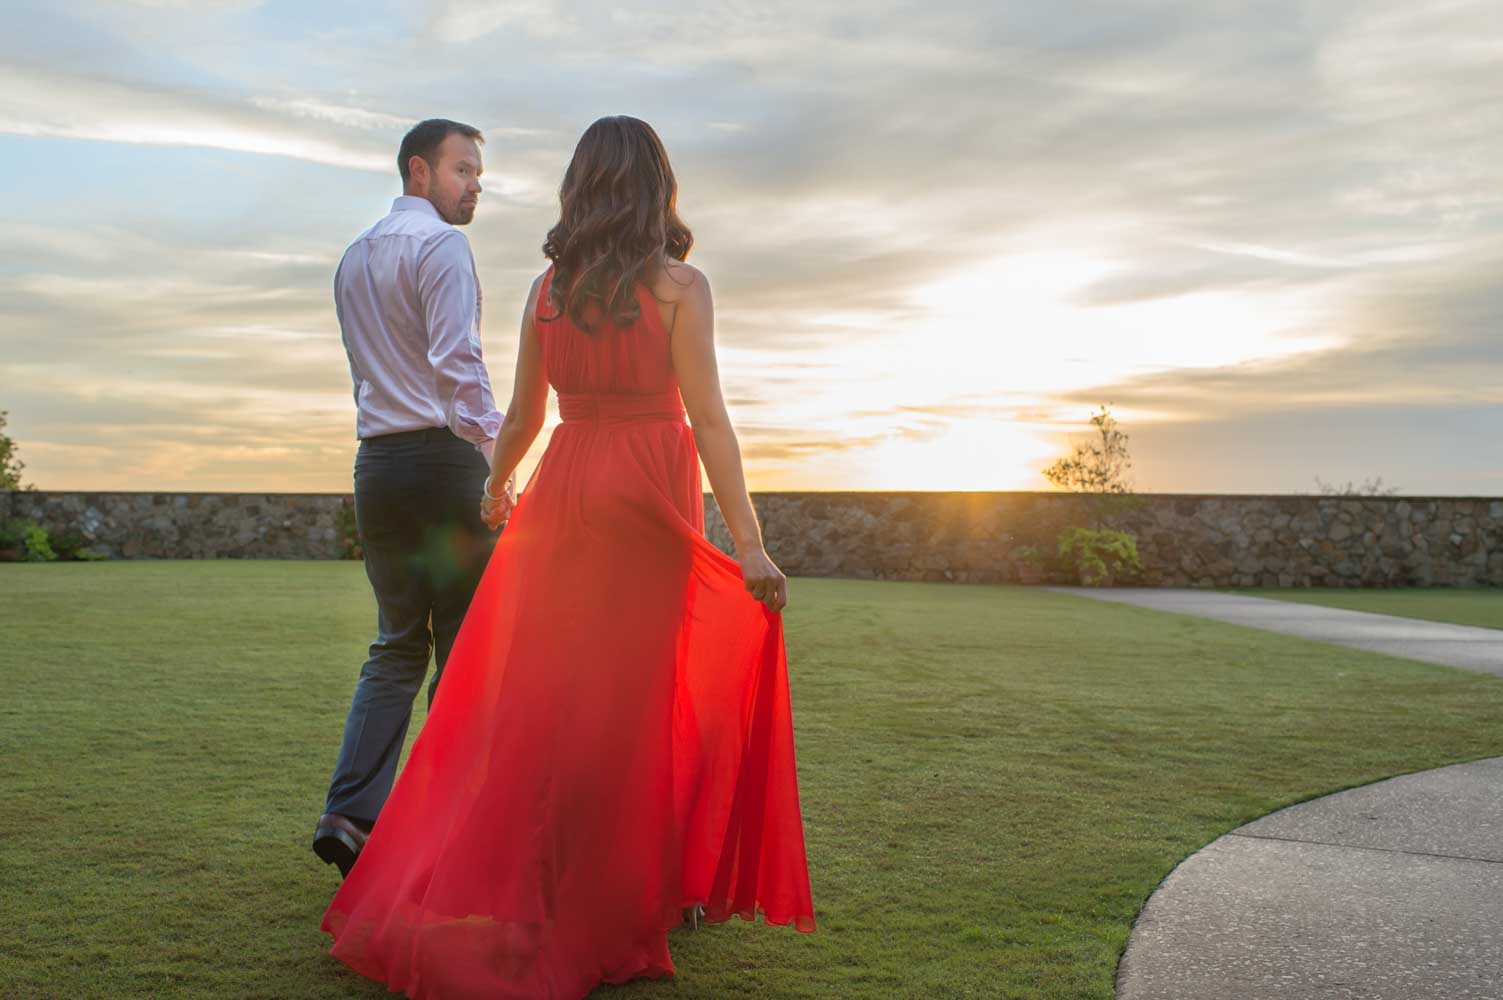 sun shining through woman's red dress while she walks with fiance